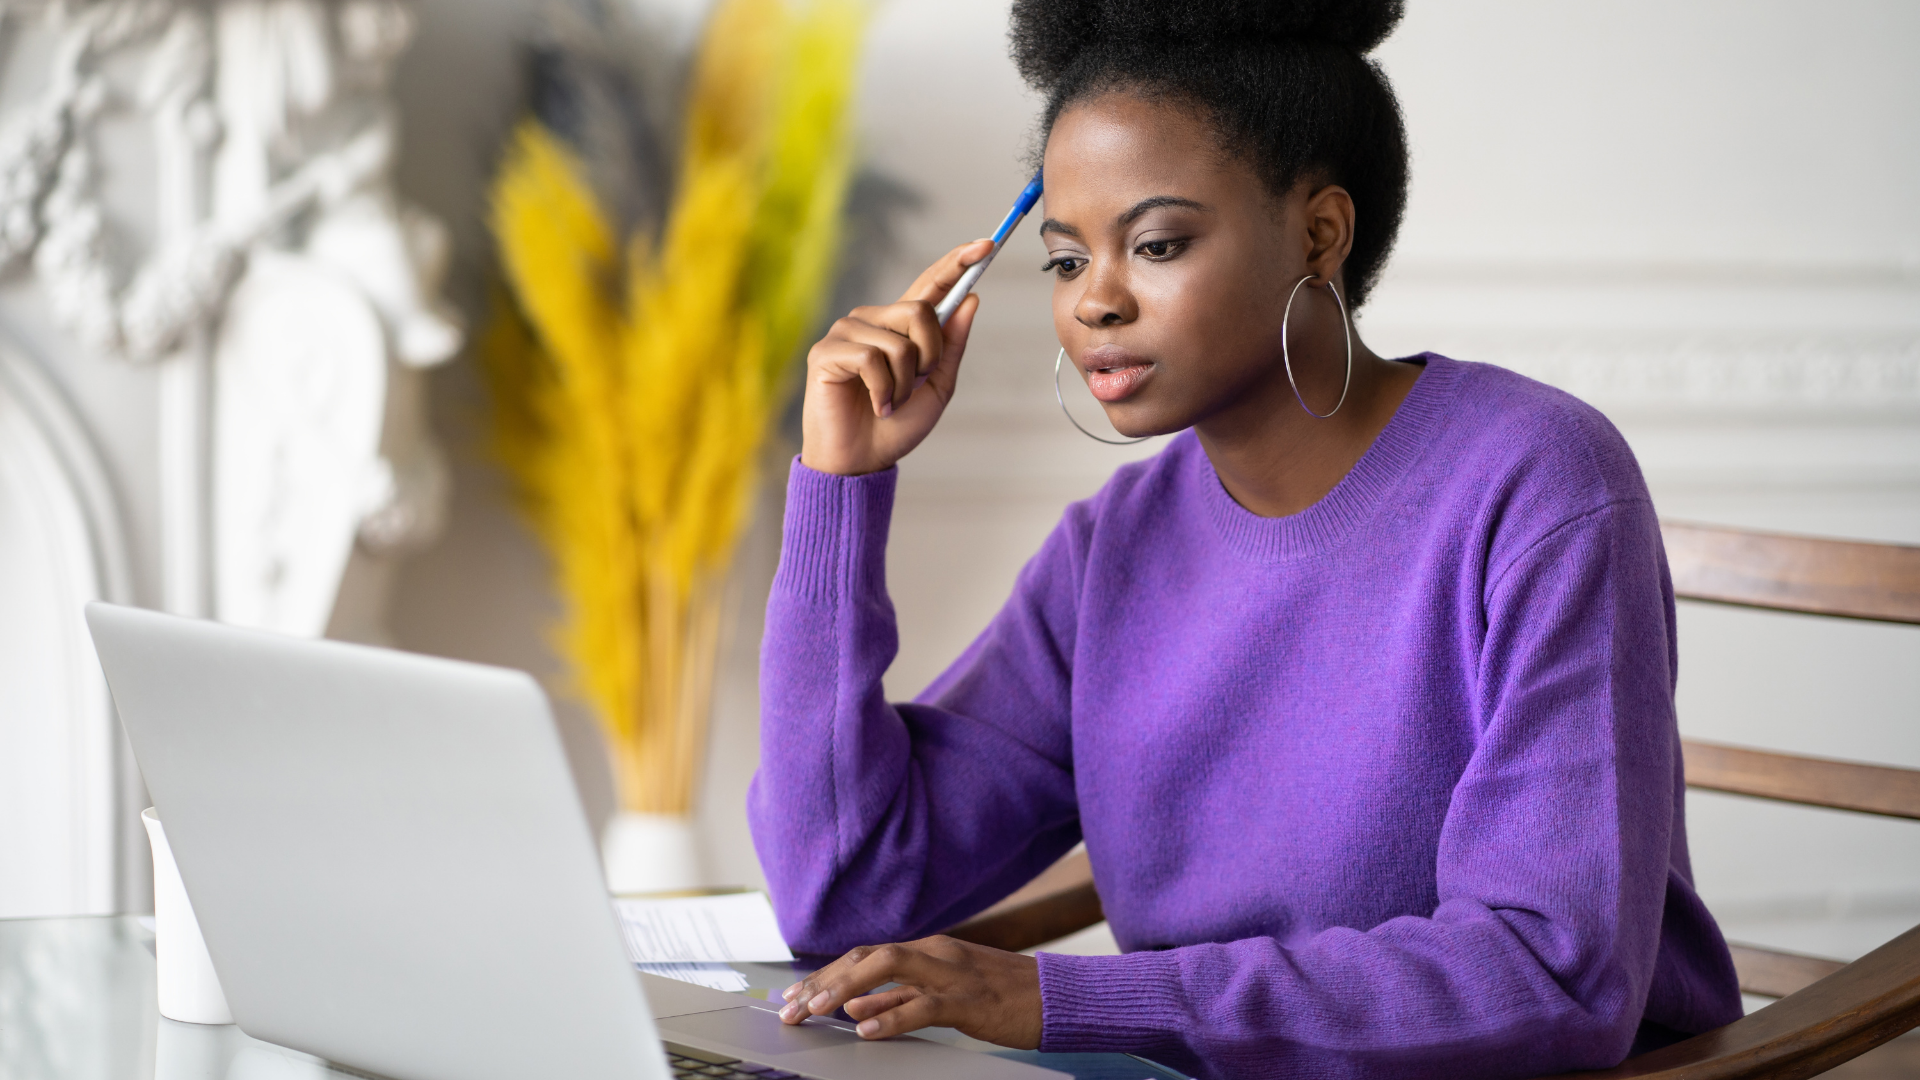 Woman in purple sweater reads online furniture reviews on white laptop